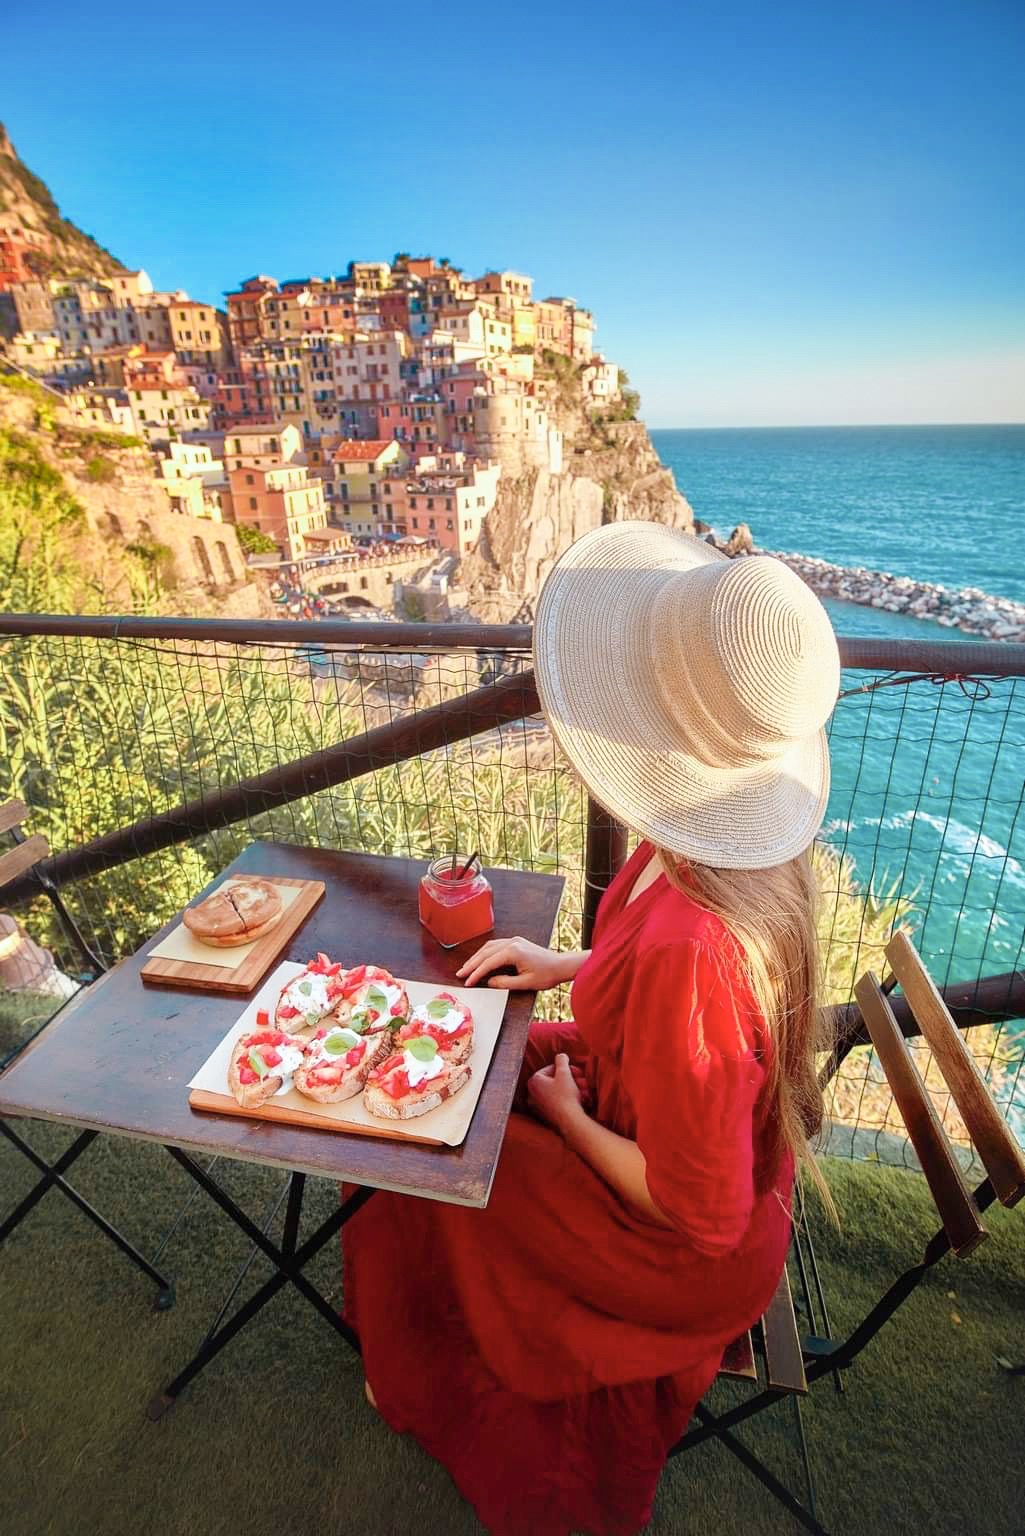 Woman in a sun hat sits at a cafe with bread overlooking Cinque Terre.